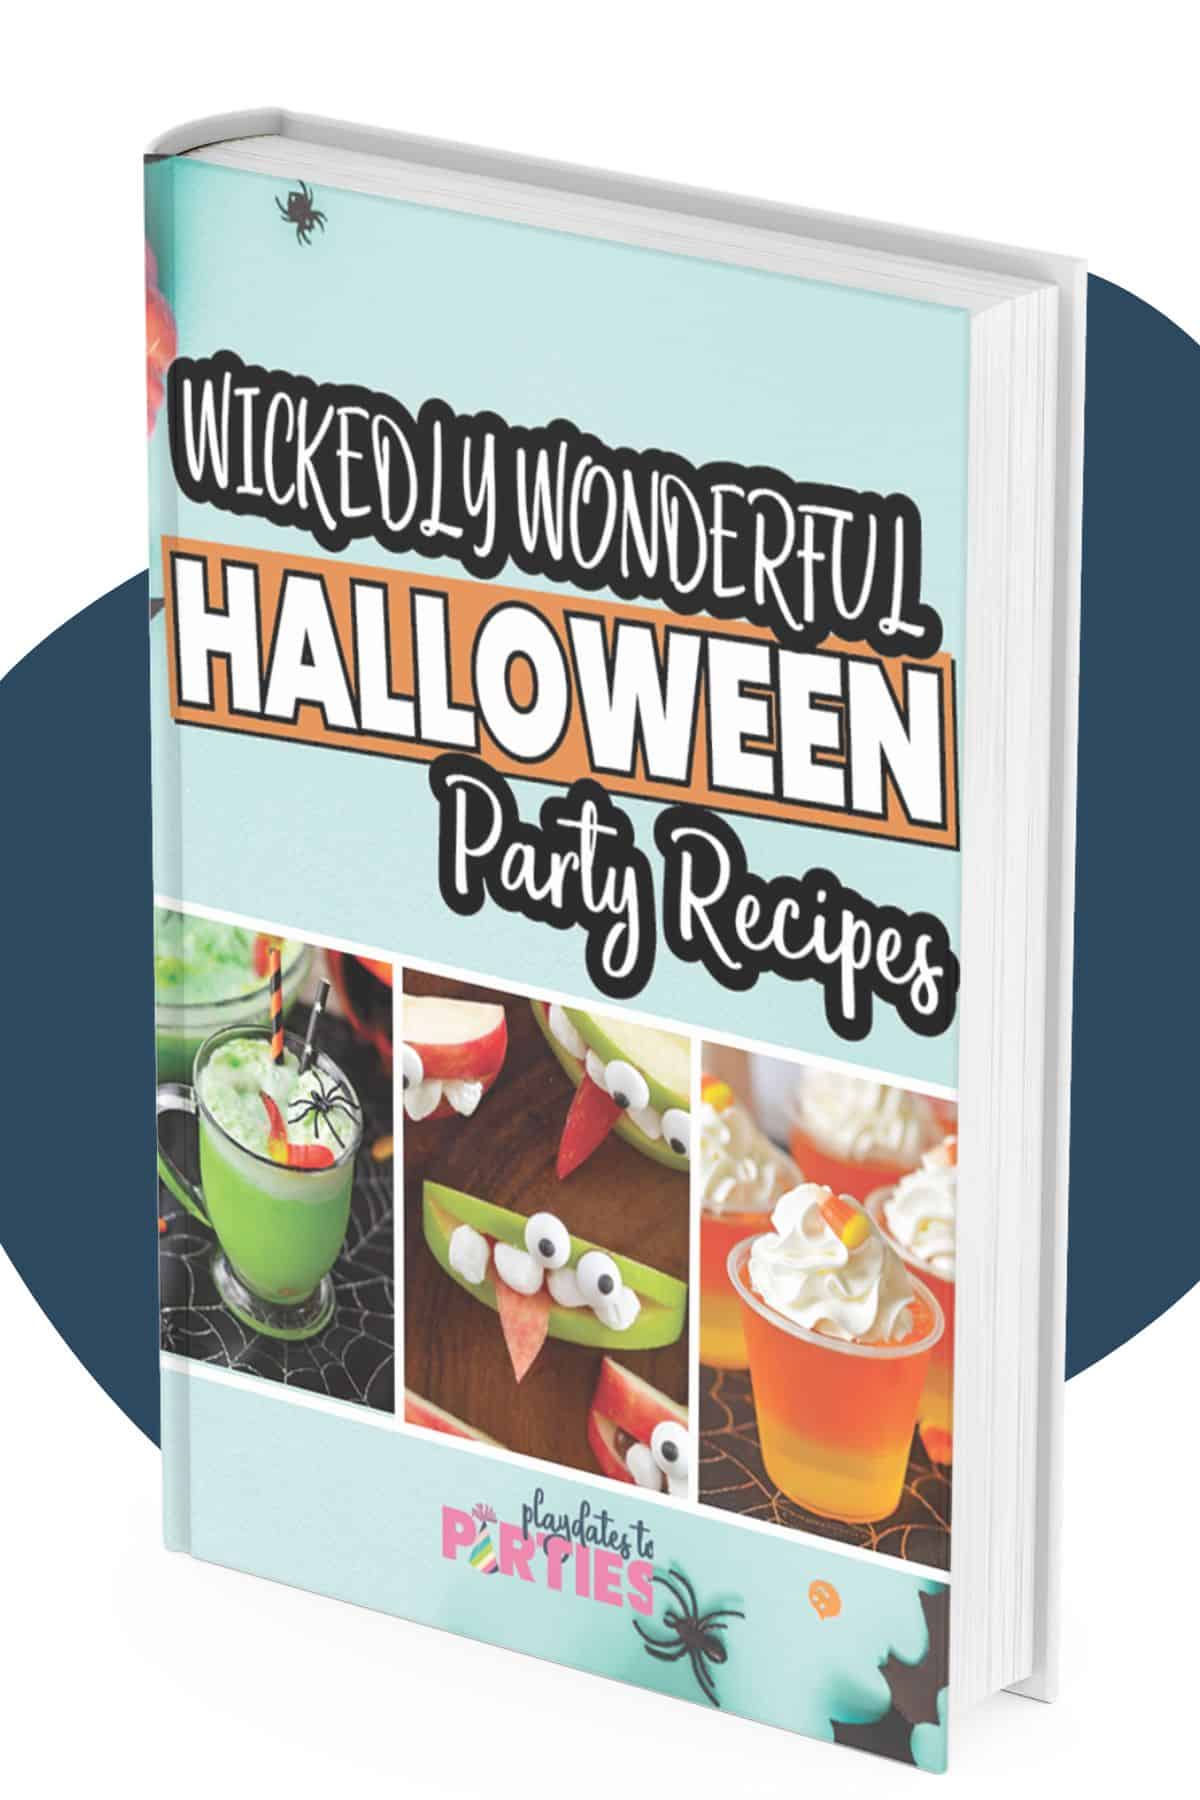 Wickedly Wonderful Halloween Party Recipes